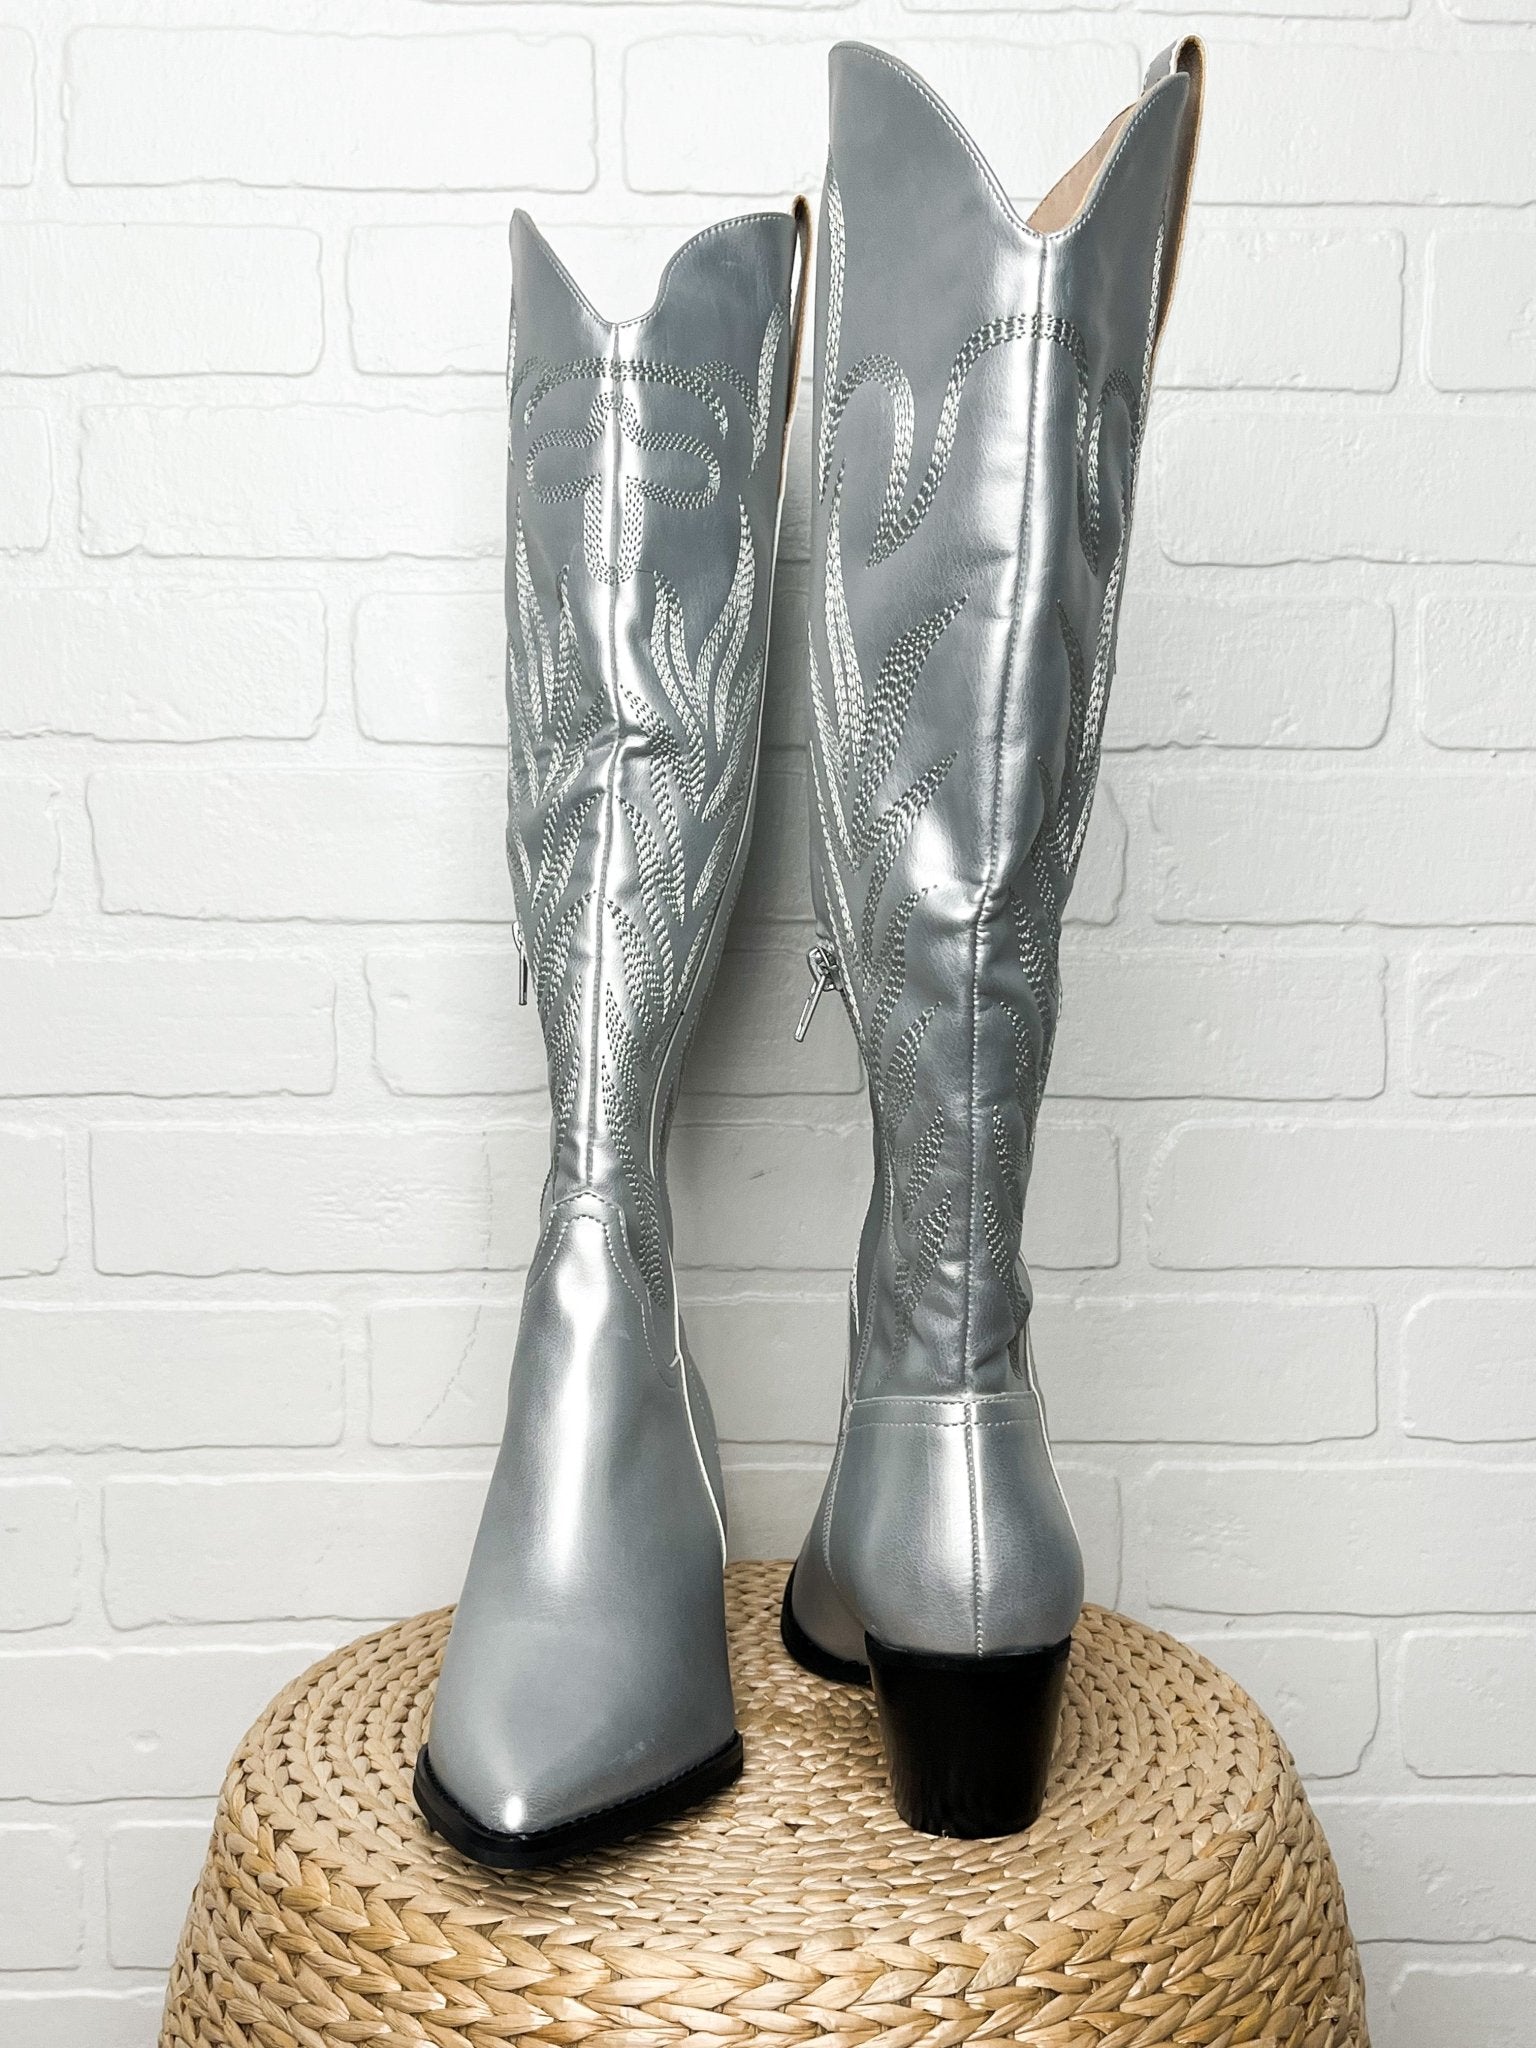 Samara cowboy boots silver - Affordable Shoes - Boutique Shoes at Lush Fashion Lounge Boutique in Oklahoma City